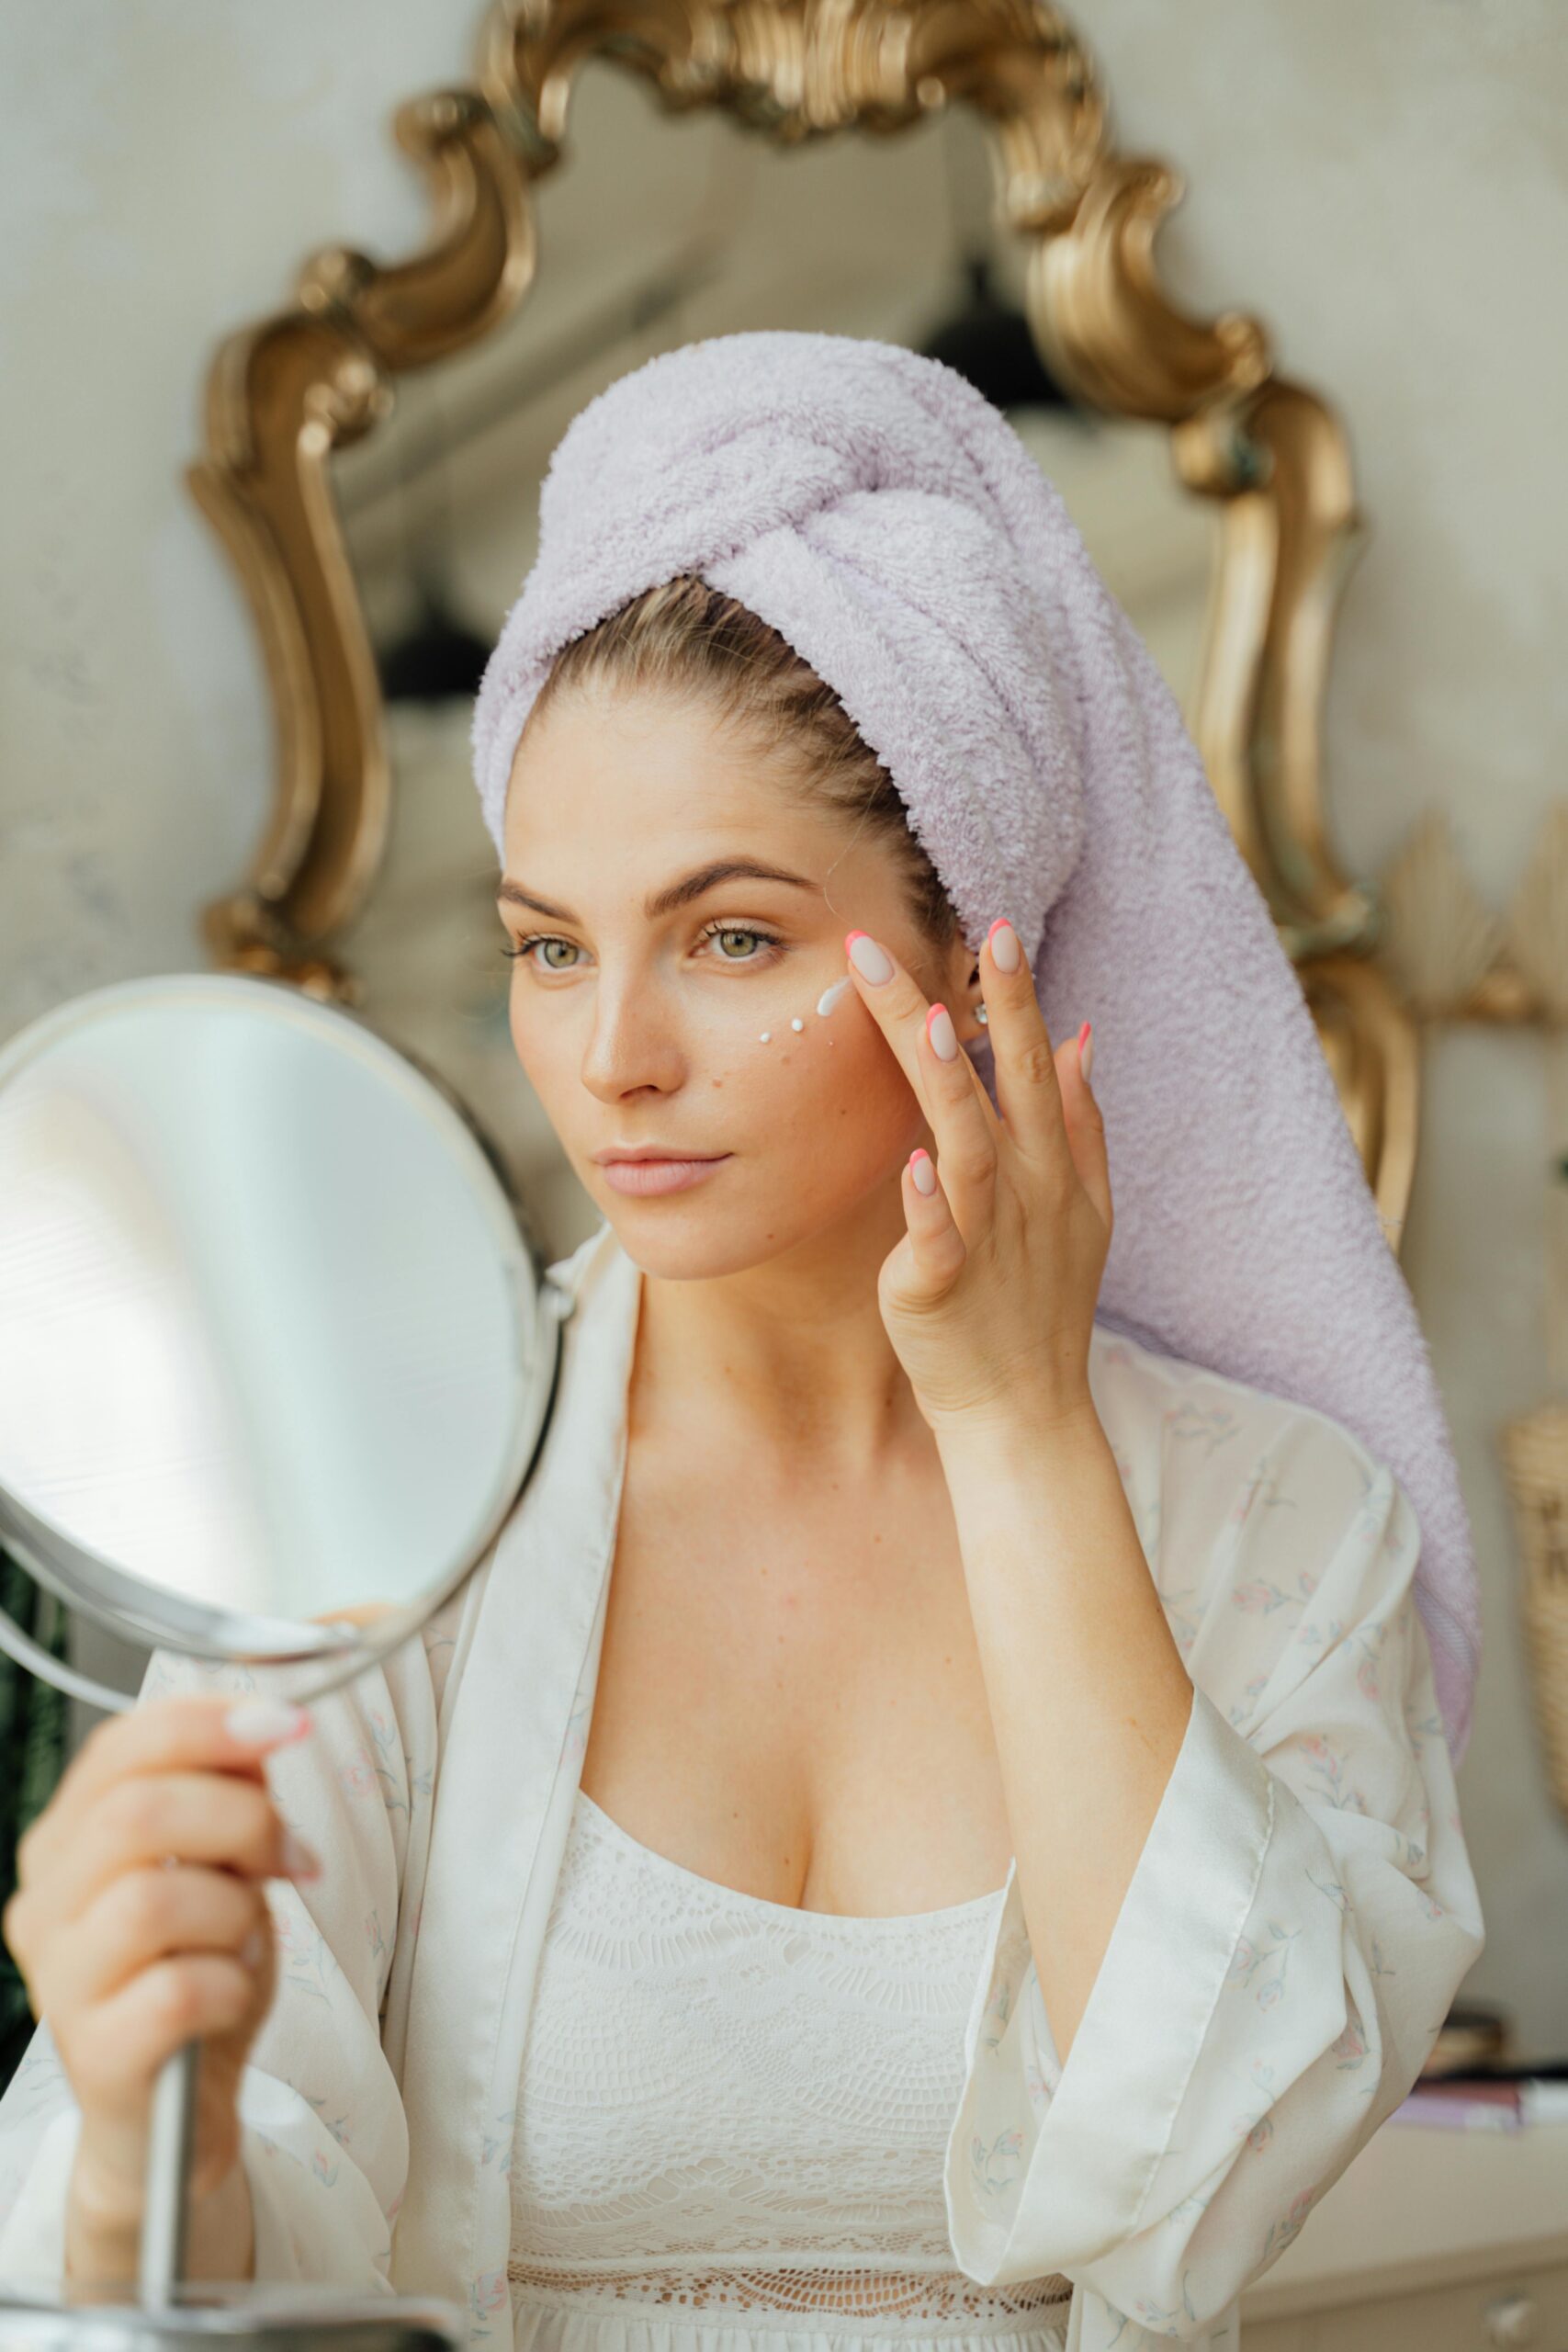 6 Skin Care Products to Add to Your Morning Routine